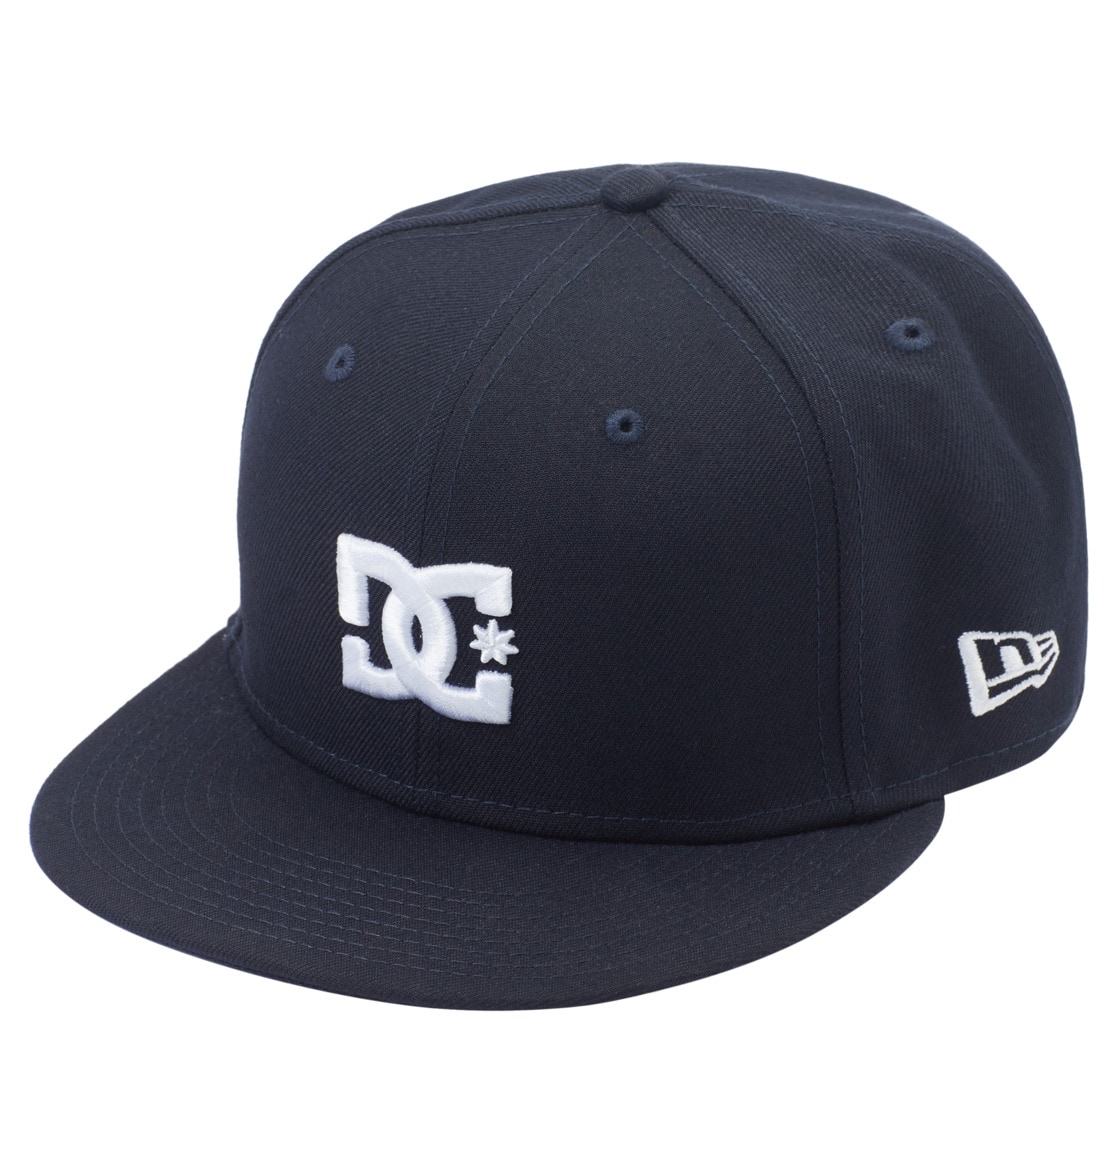 DC Shoes im Fitted Online Shop Cap OTTO »Championship«